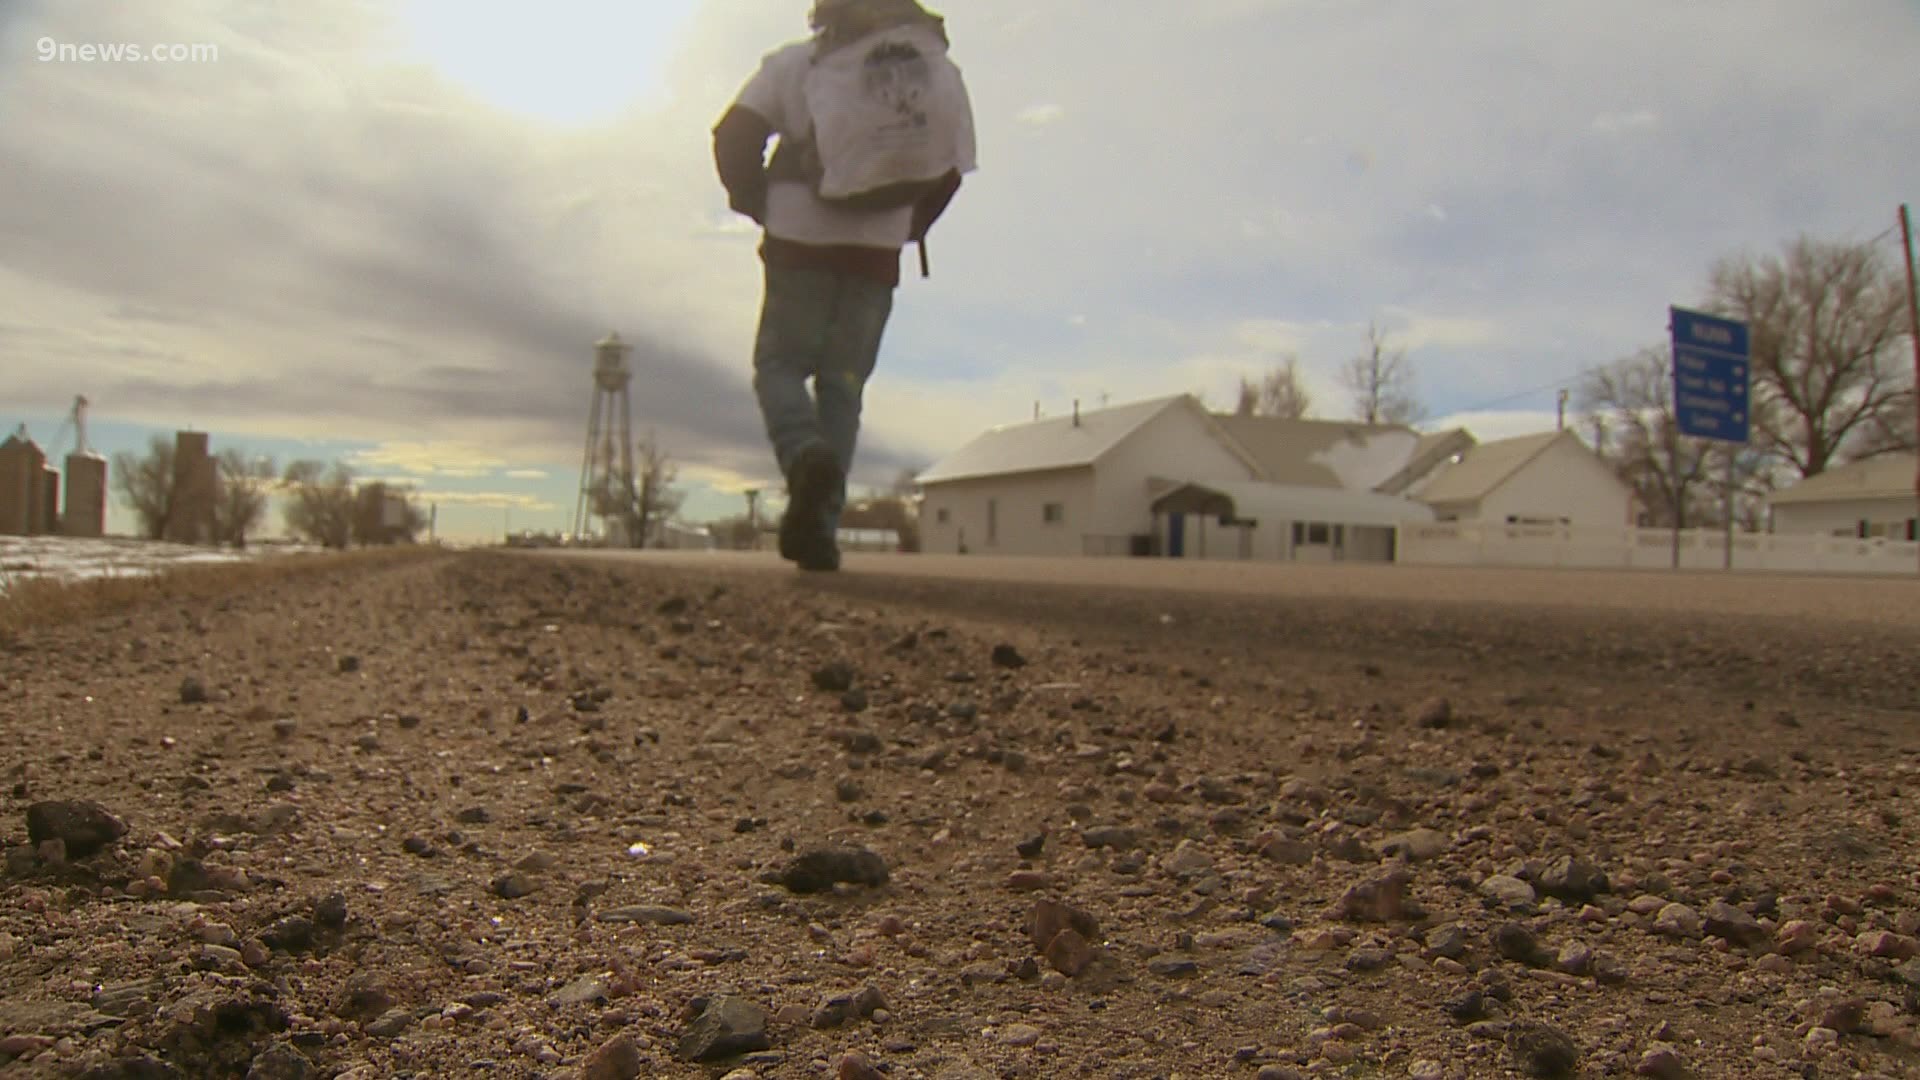 This walk from Cheyenne to Denver is for 21-year-old Justin Smithey, who was diagnosed with brain cancer in September.